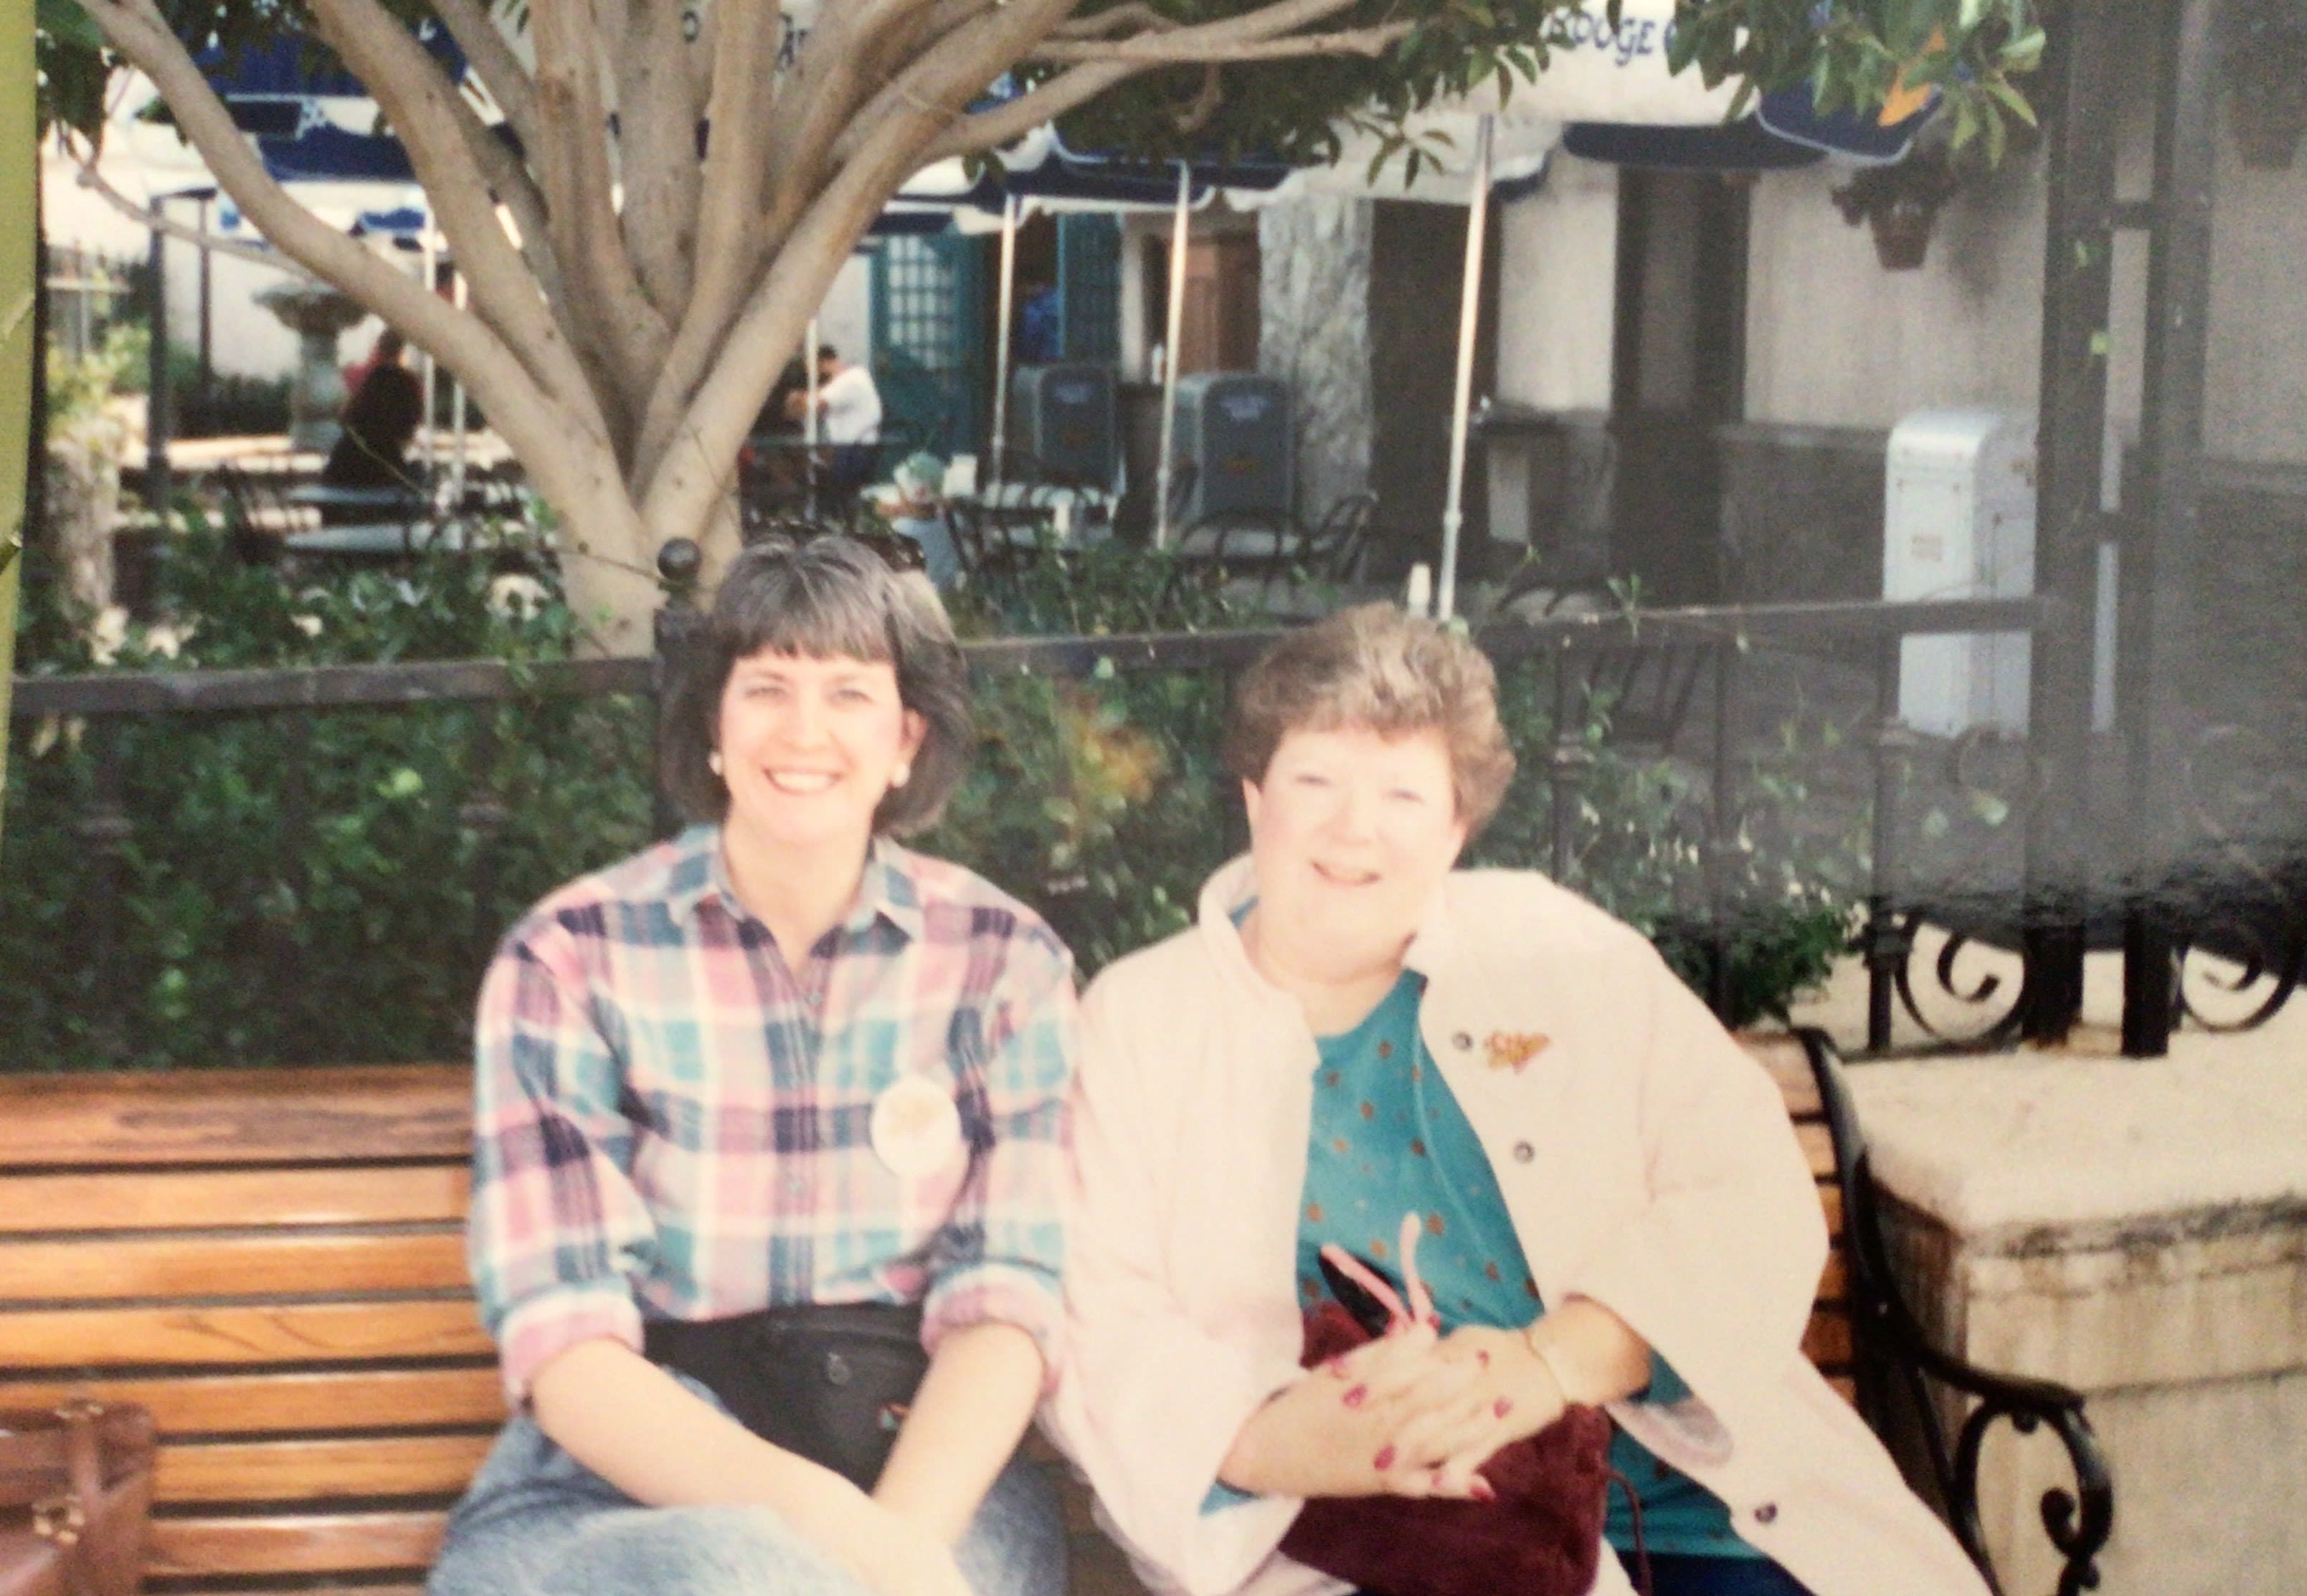 Here's Debbie and Cathy photographed in the 1990s. They stayed in touch even with Cathy moved away from California.